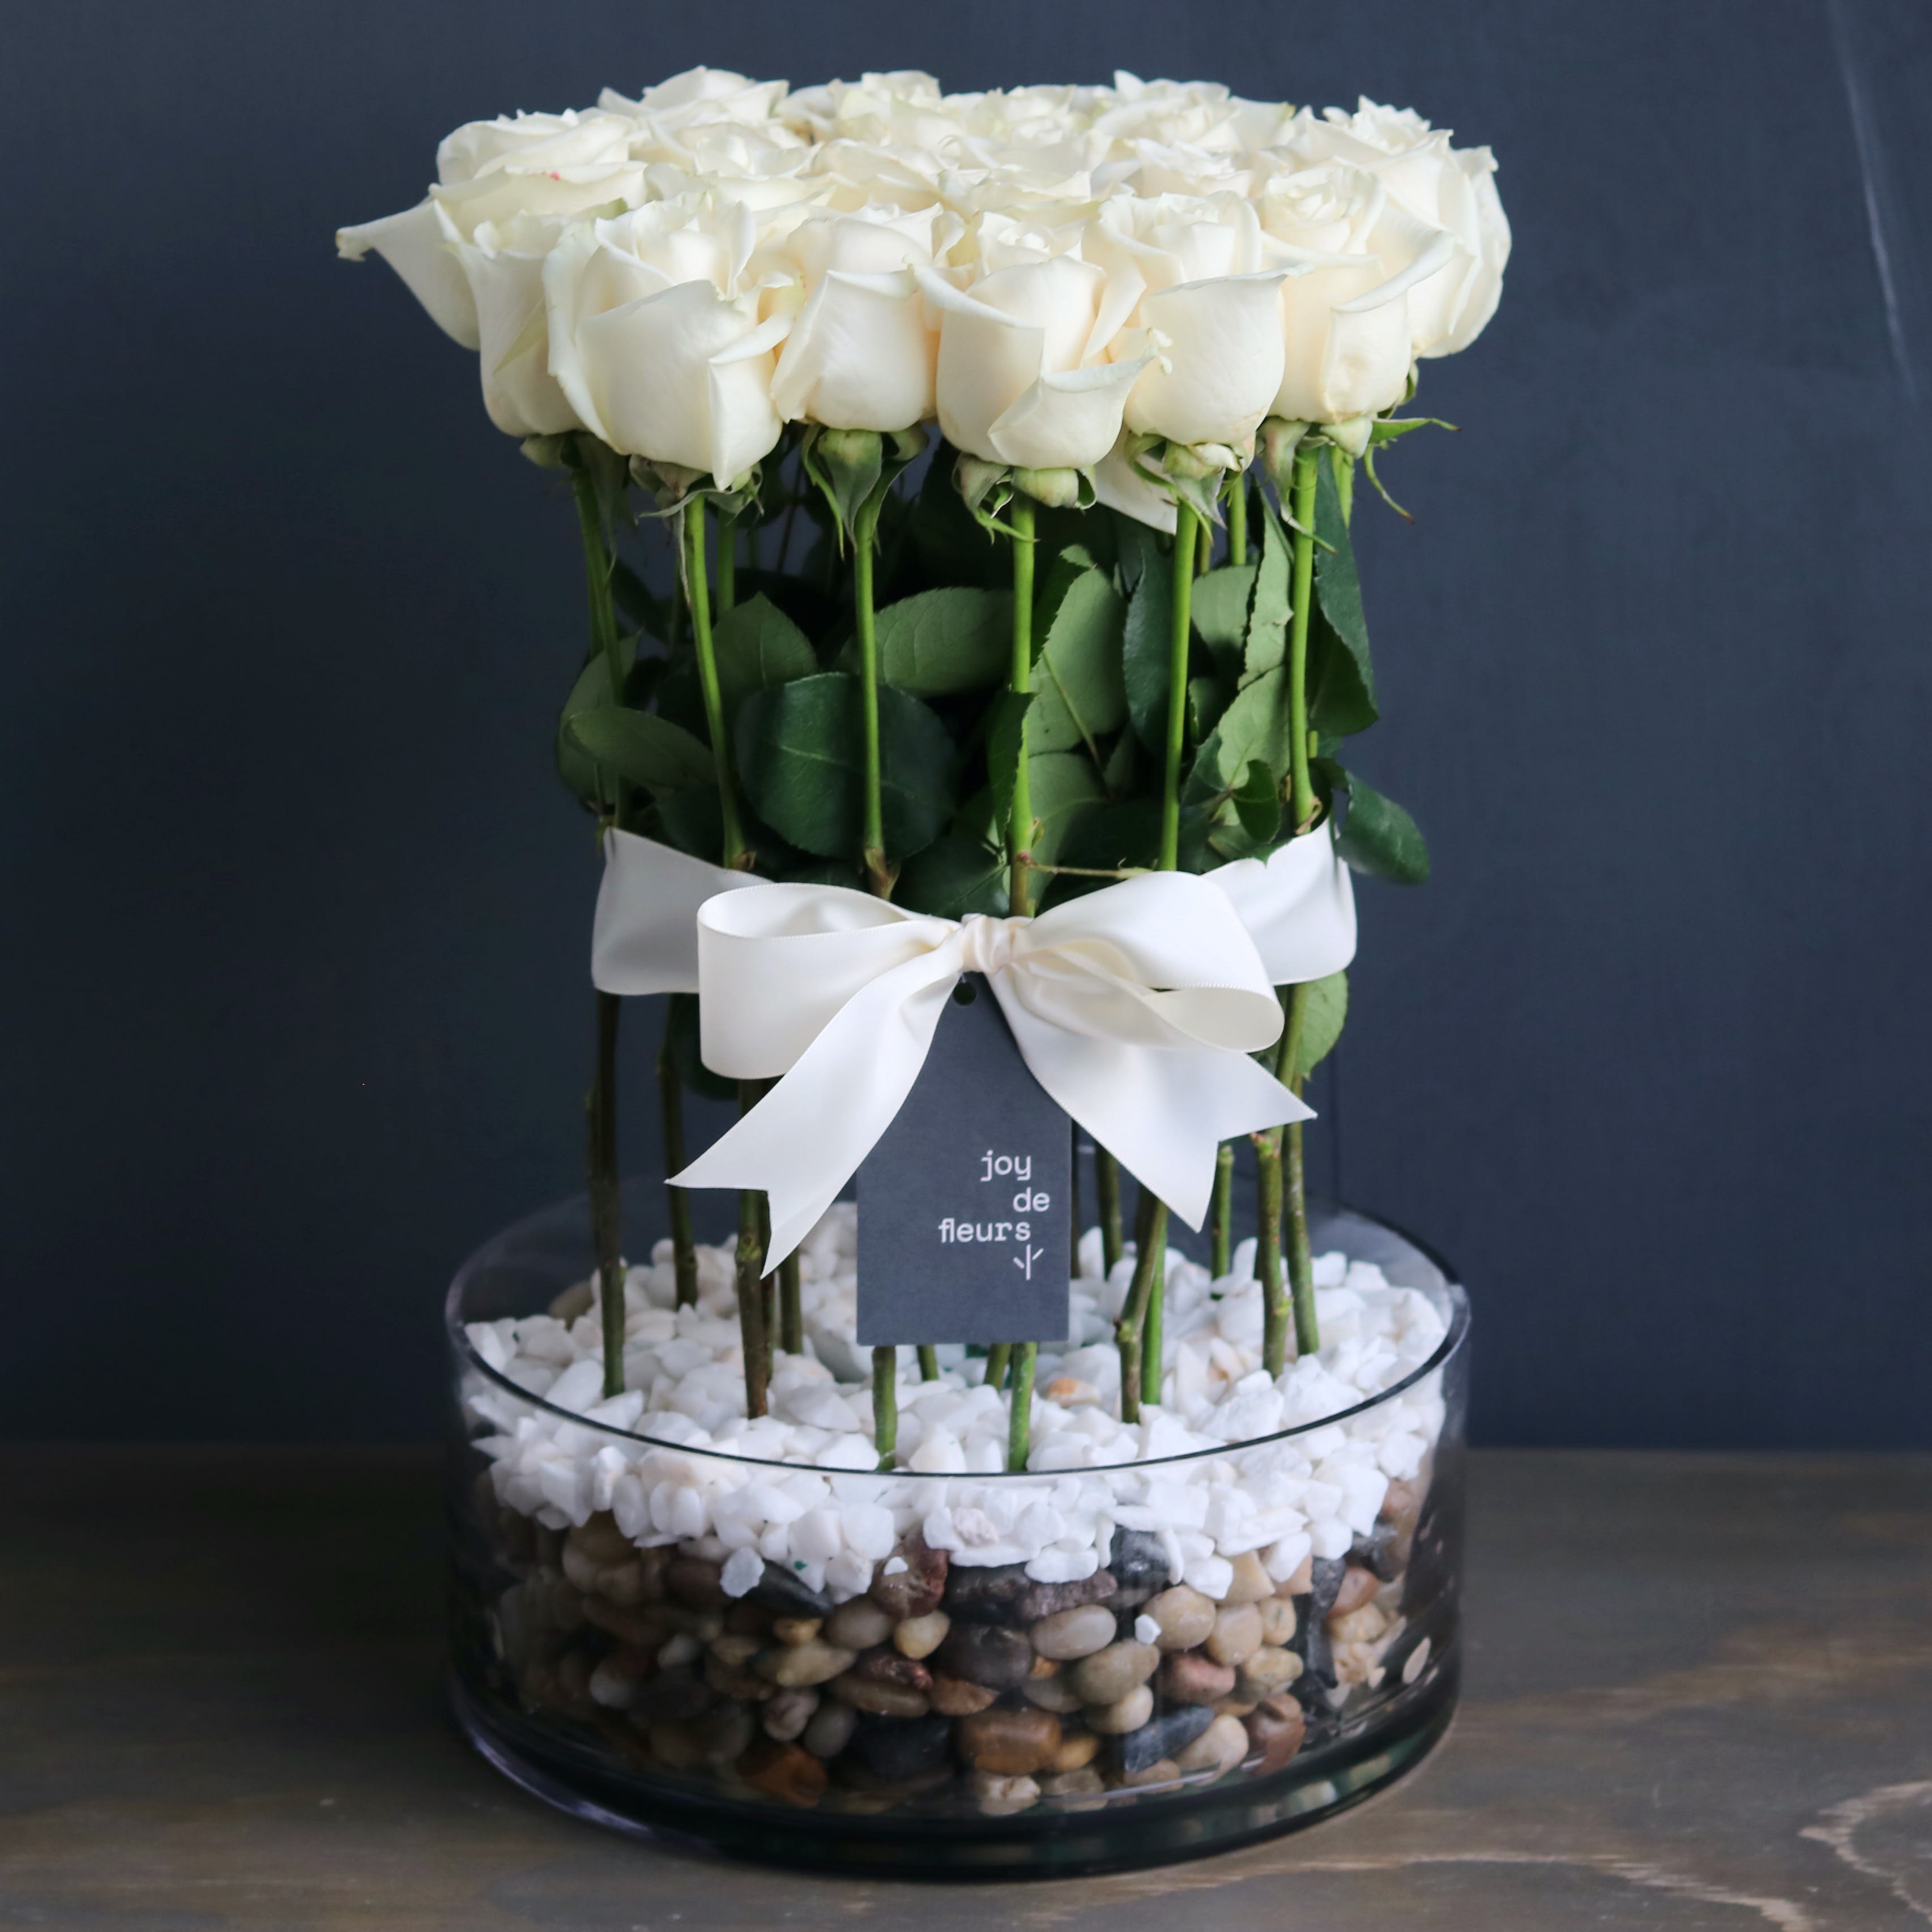 Happy Birthday! Vase with Beautiful Rose Flowers on Table Near White Brick  Wall Stock Photo - Image of event, petal: 221551430